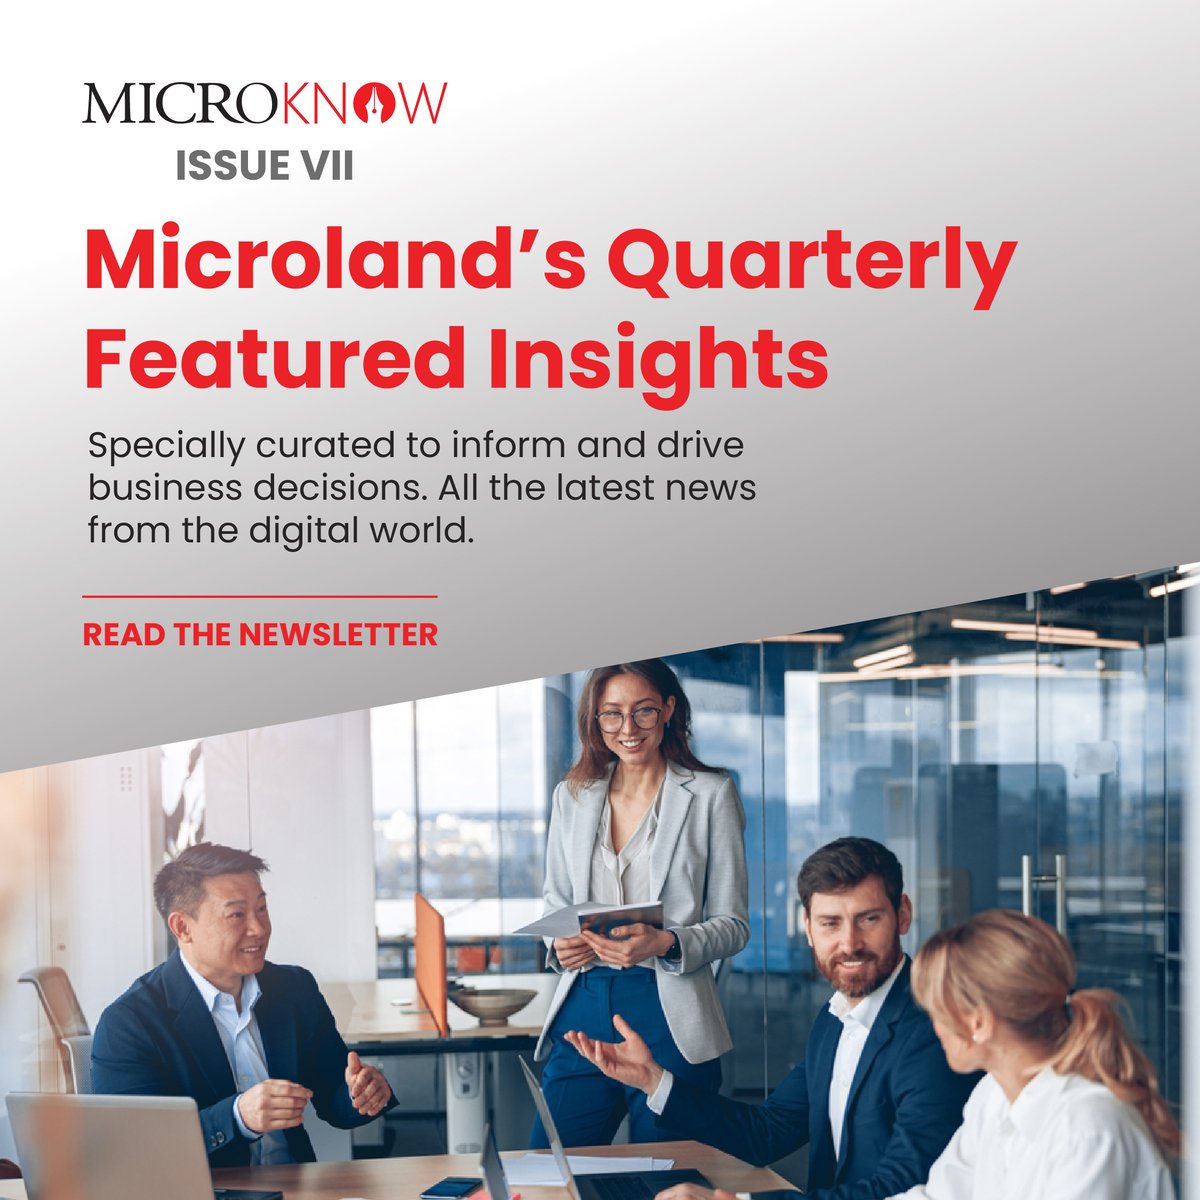 #MicroKnow, edition 7. Featuring articles from Chief Microlander Pradeep Kar, blogs on innovative technologies, case studies highlighting the applications of #Microland’s solutions and more. t.ly/pmlSN #NewsLetter #Gartner #MagicQuadrant #MNS #ManagedNetworkServices